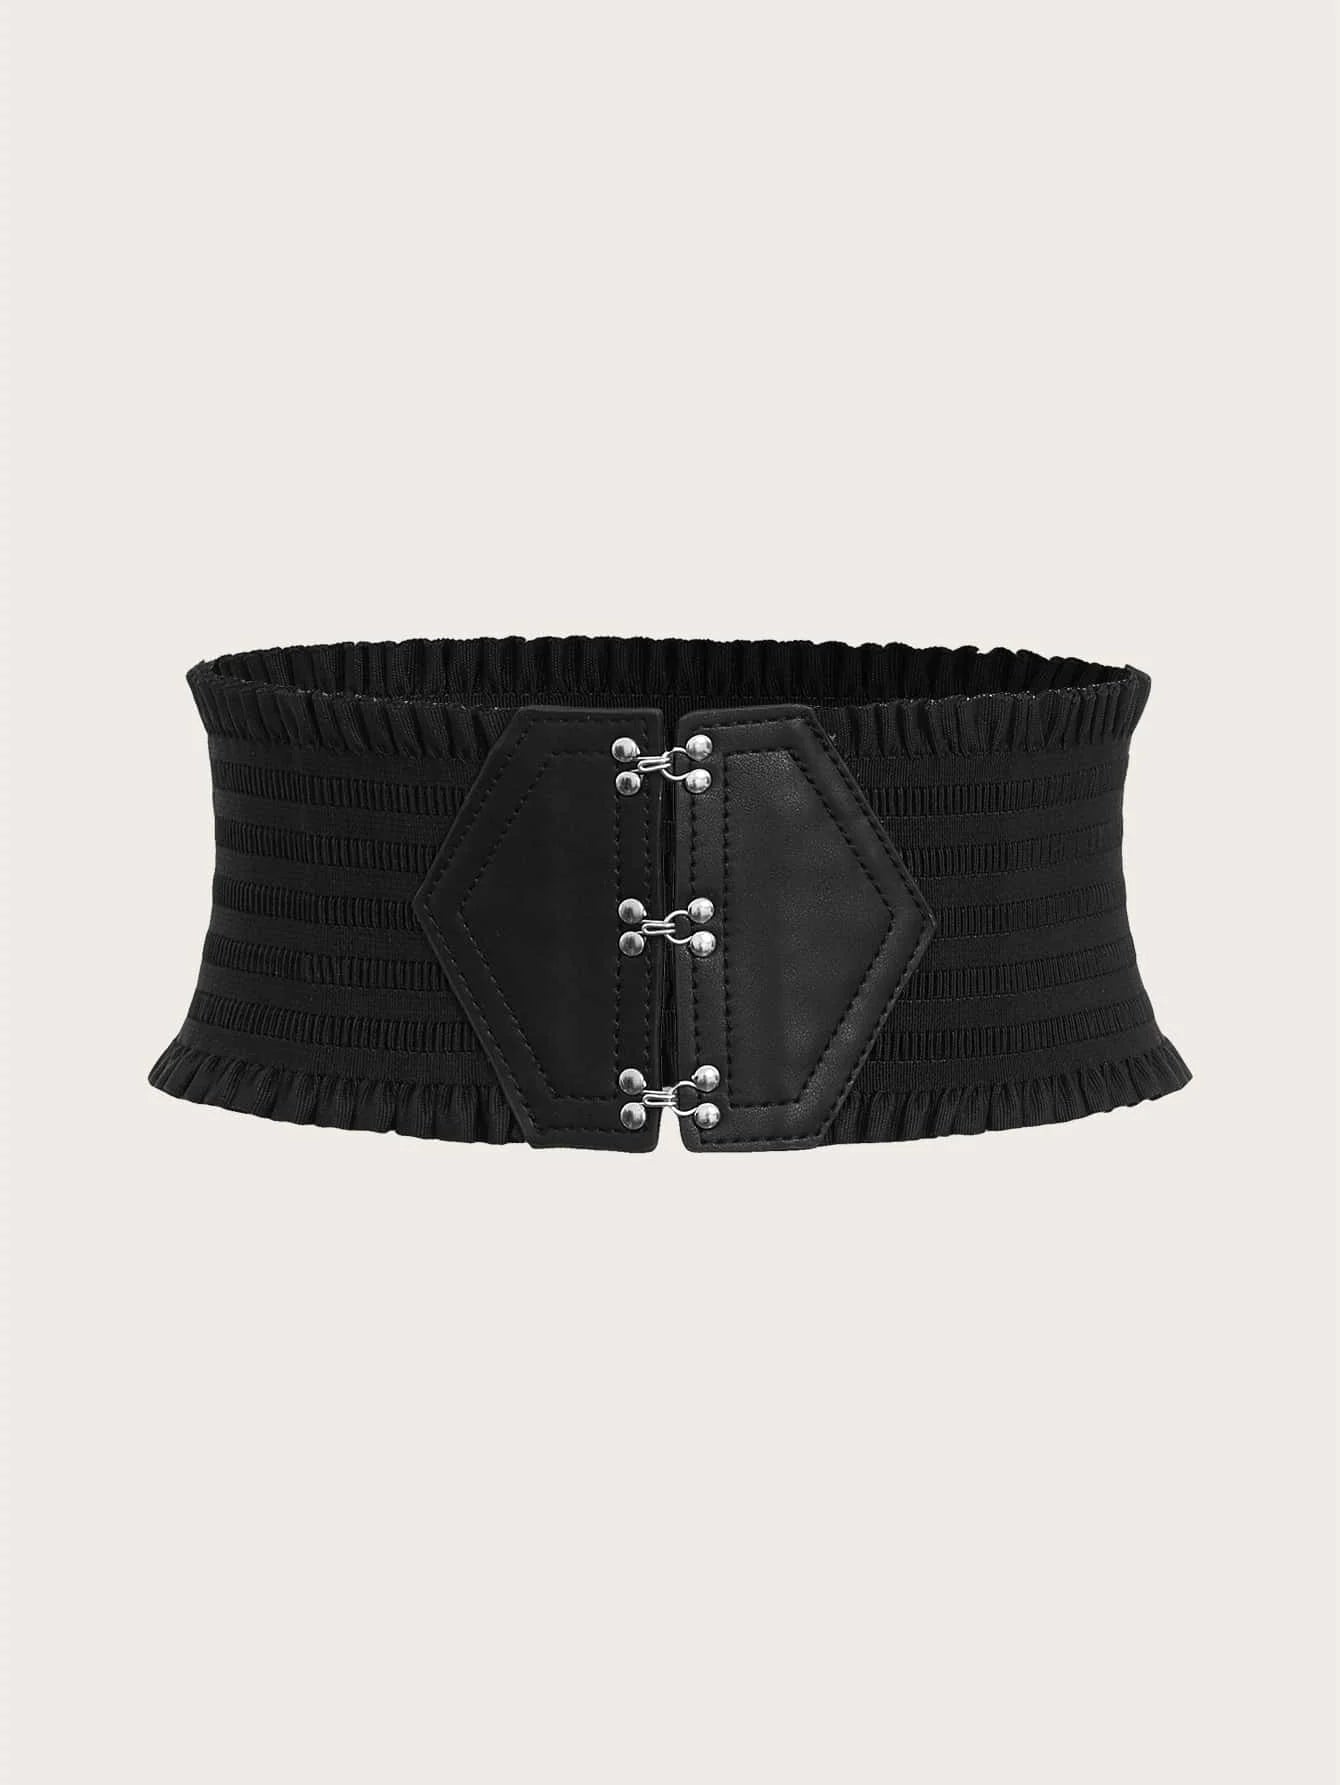 Colorful Triple Buckle Ruffles Belt: Stylish Waist Girdle for Any Occasion